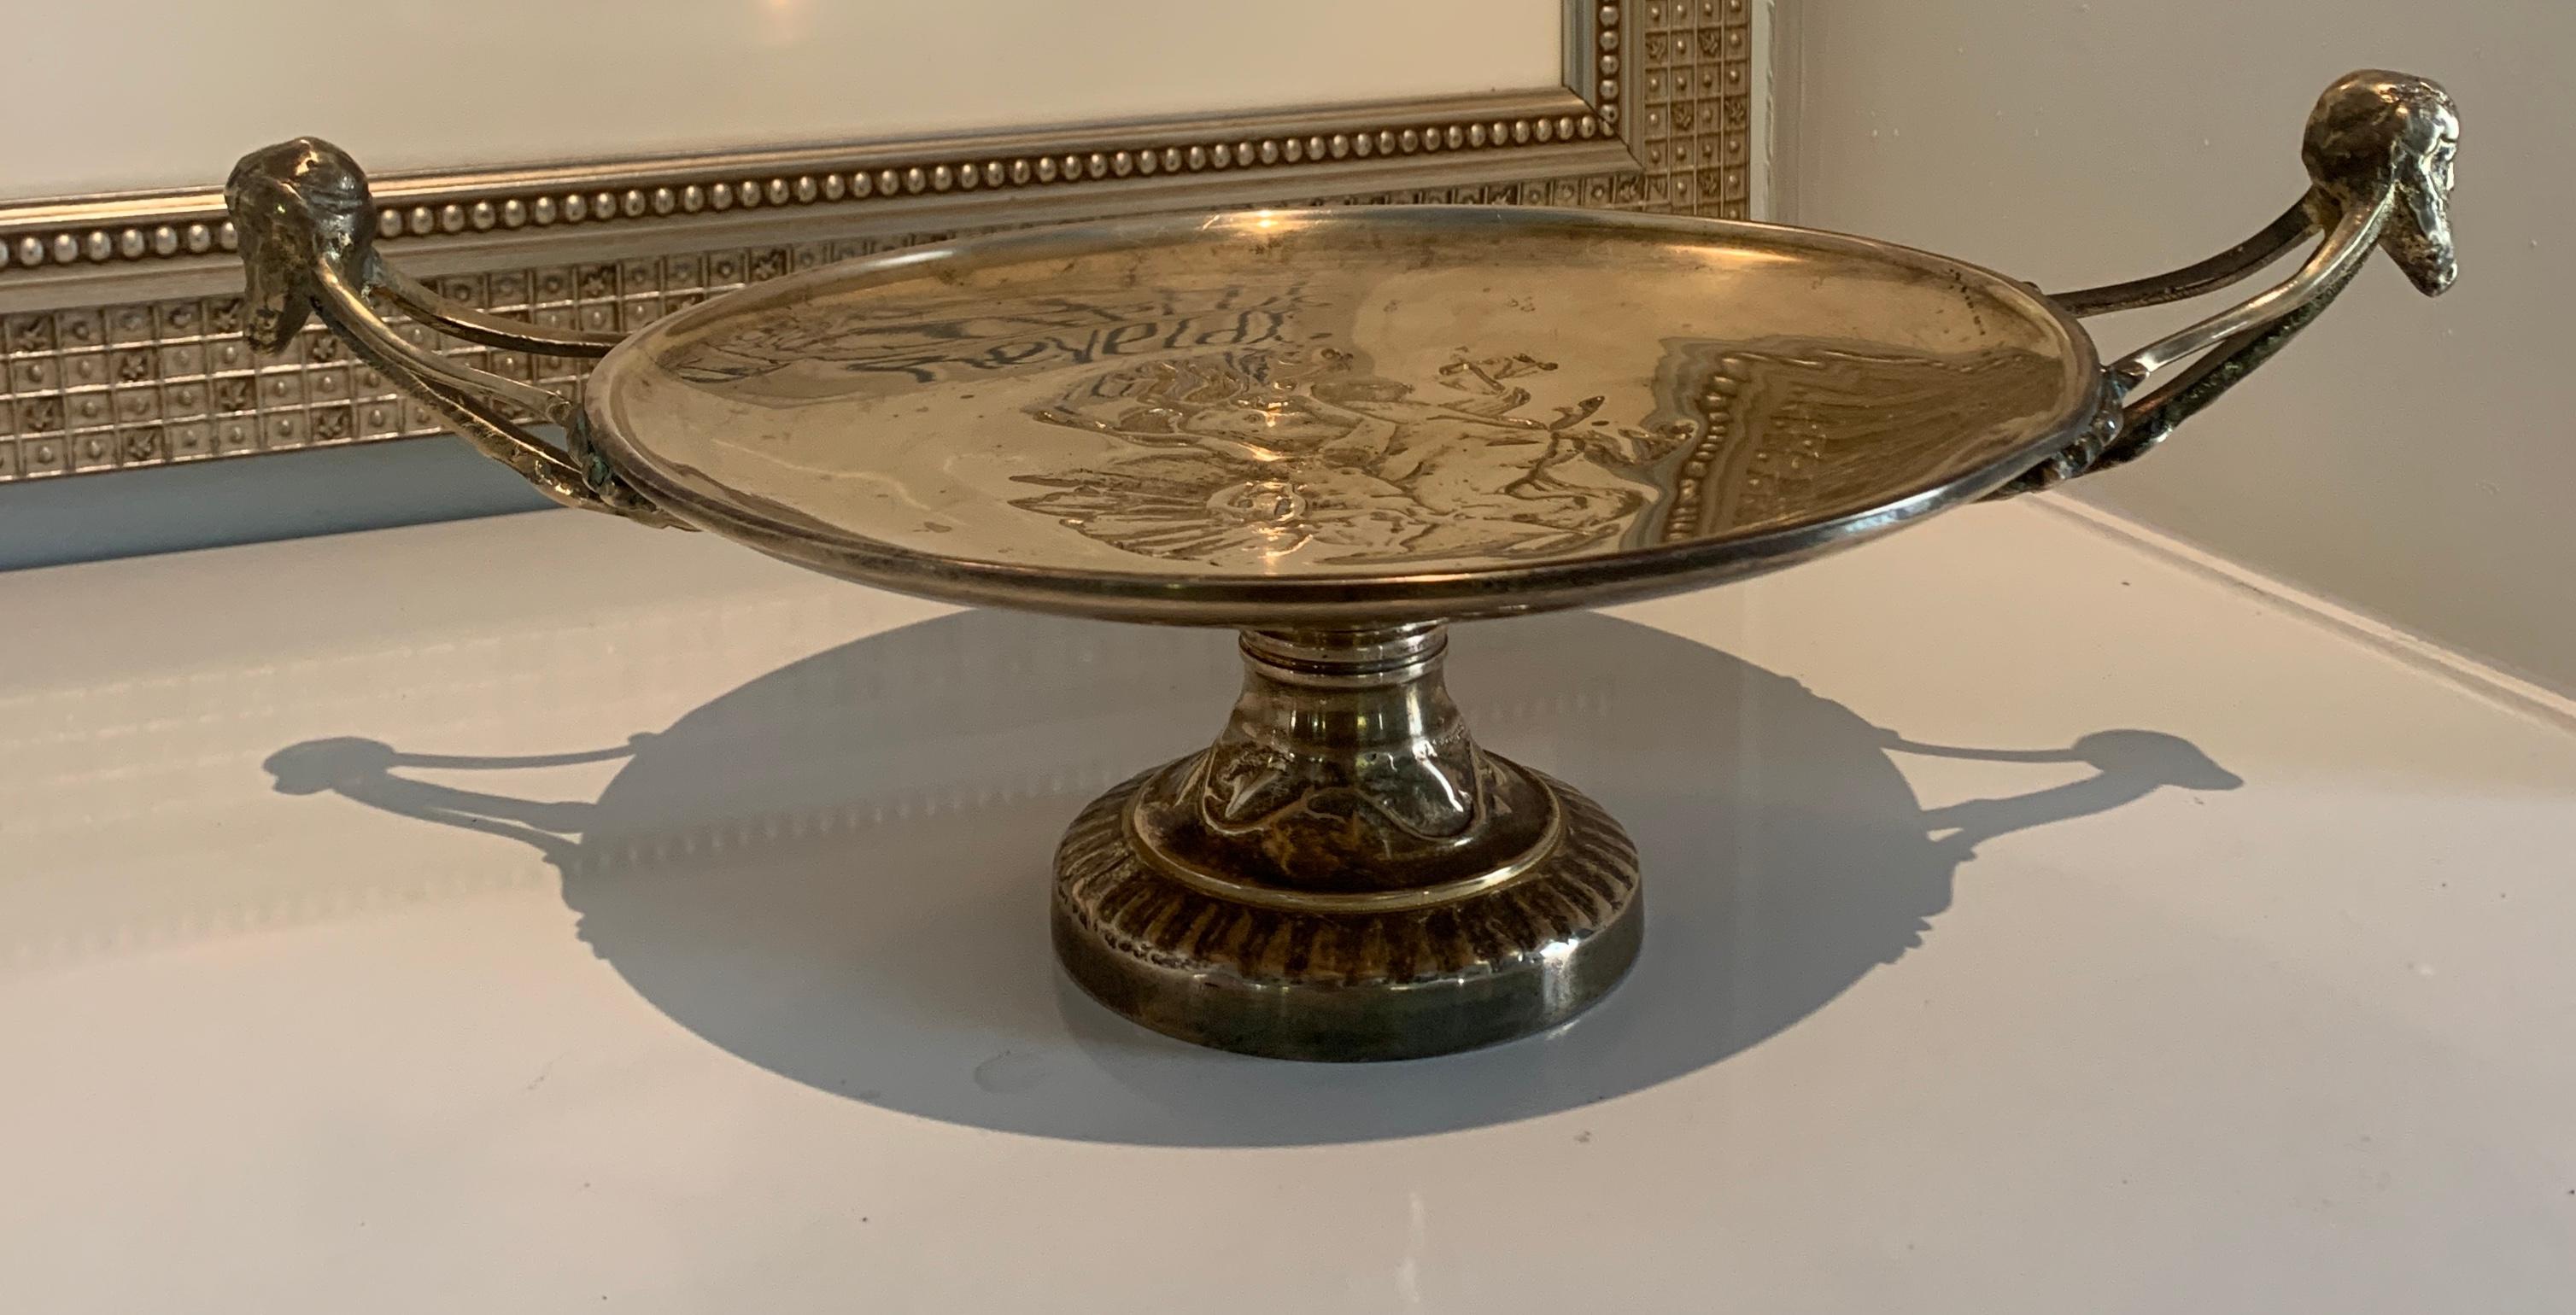 A wonderful, and very heavy, for it's size, solid brass footed Tazza by Maitland Smith. The bowl features elongated leads that end in male heads as handles with an etched brass detail in the plate above the pedestal. A stunning center piece or catch